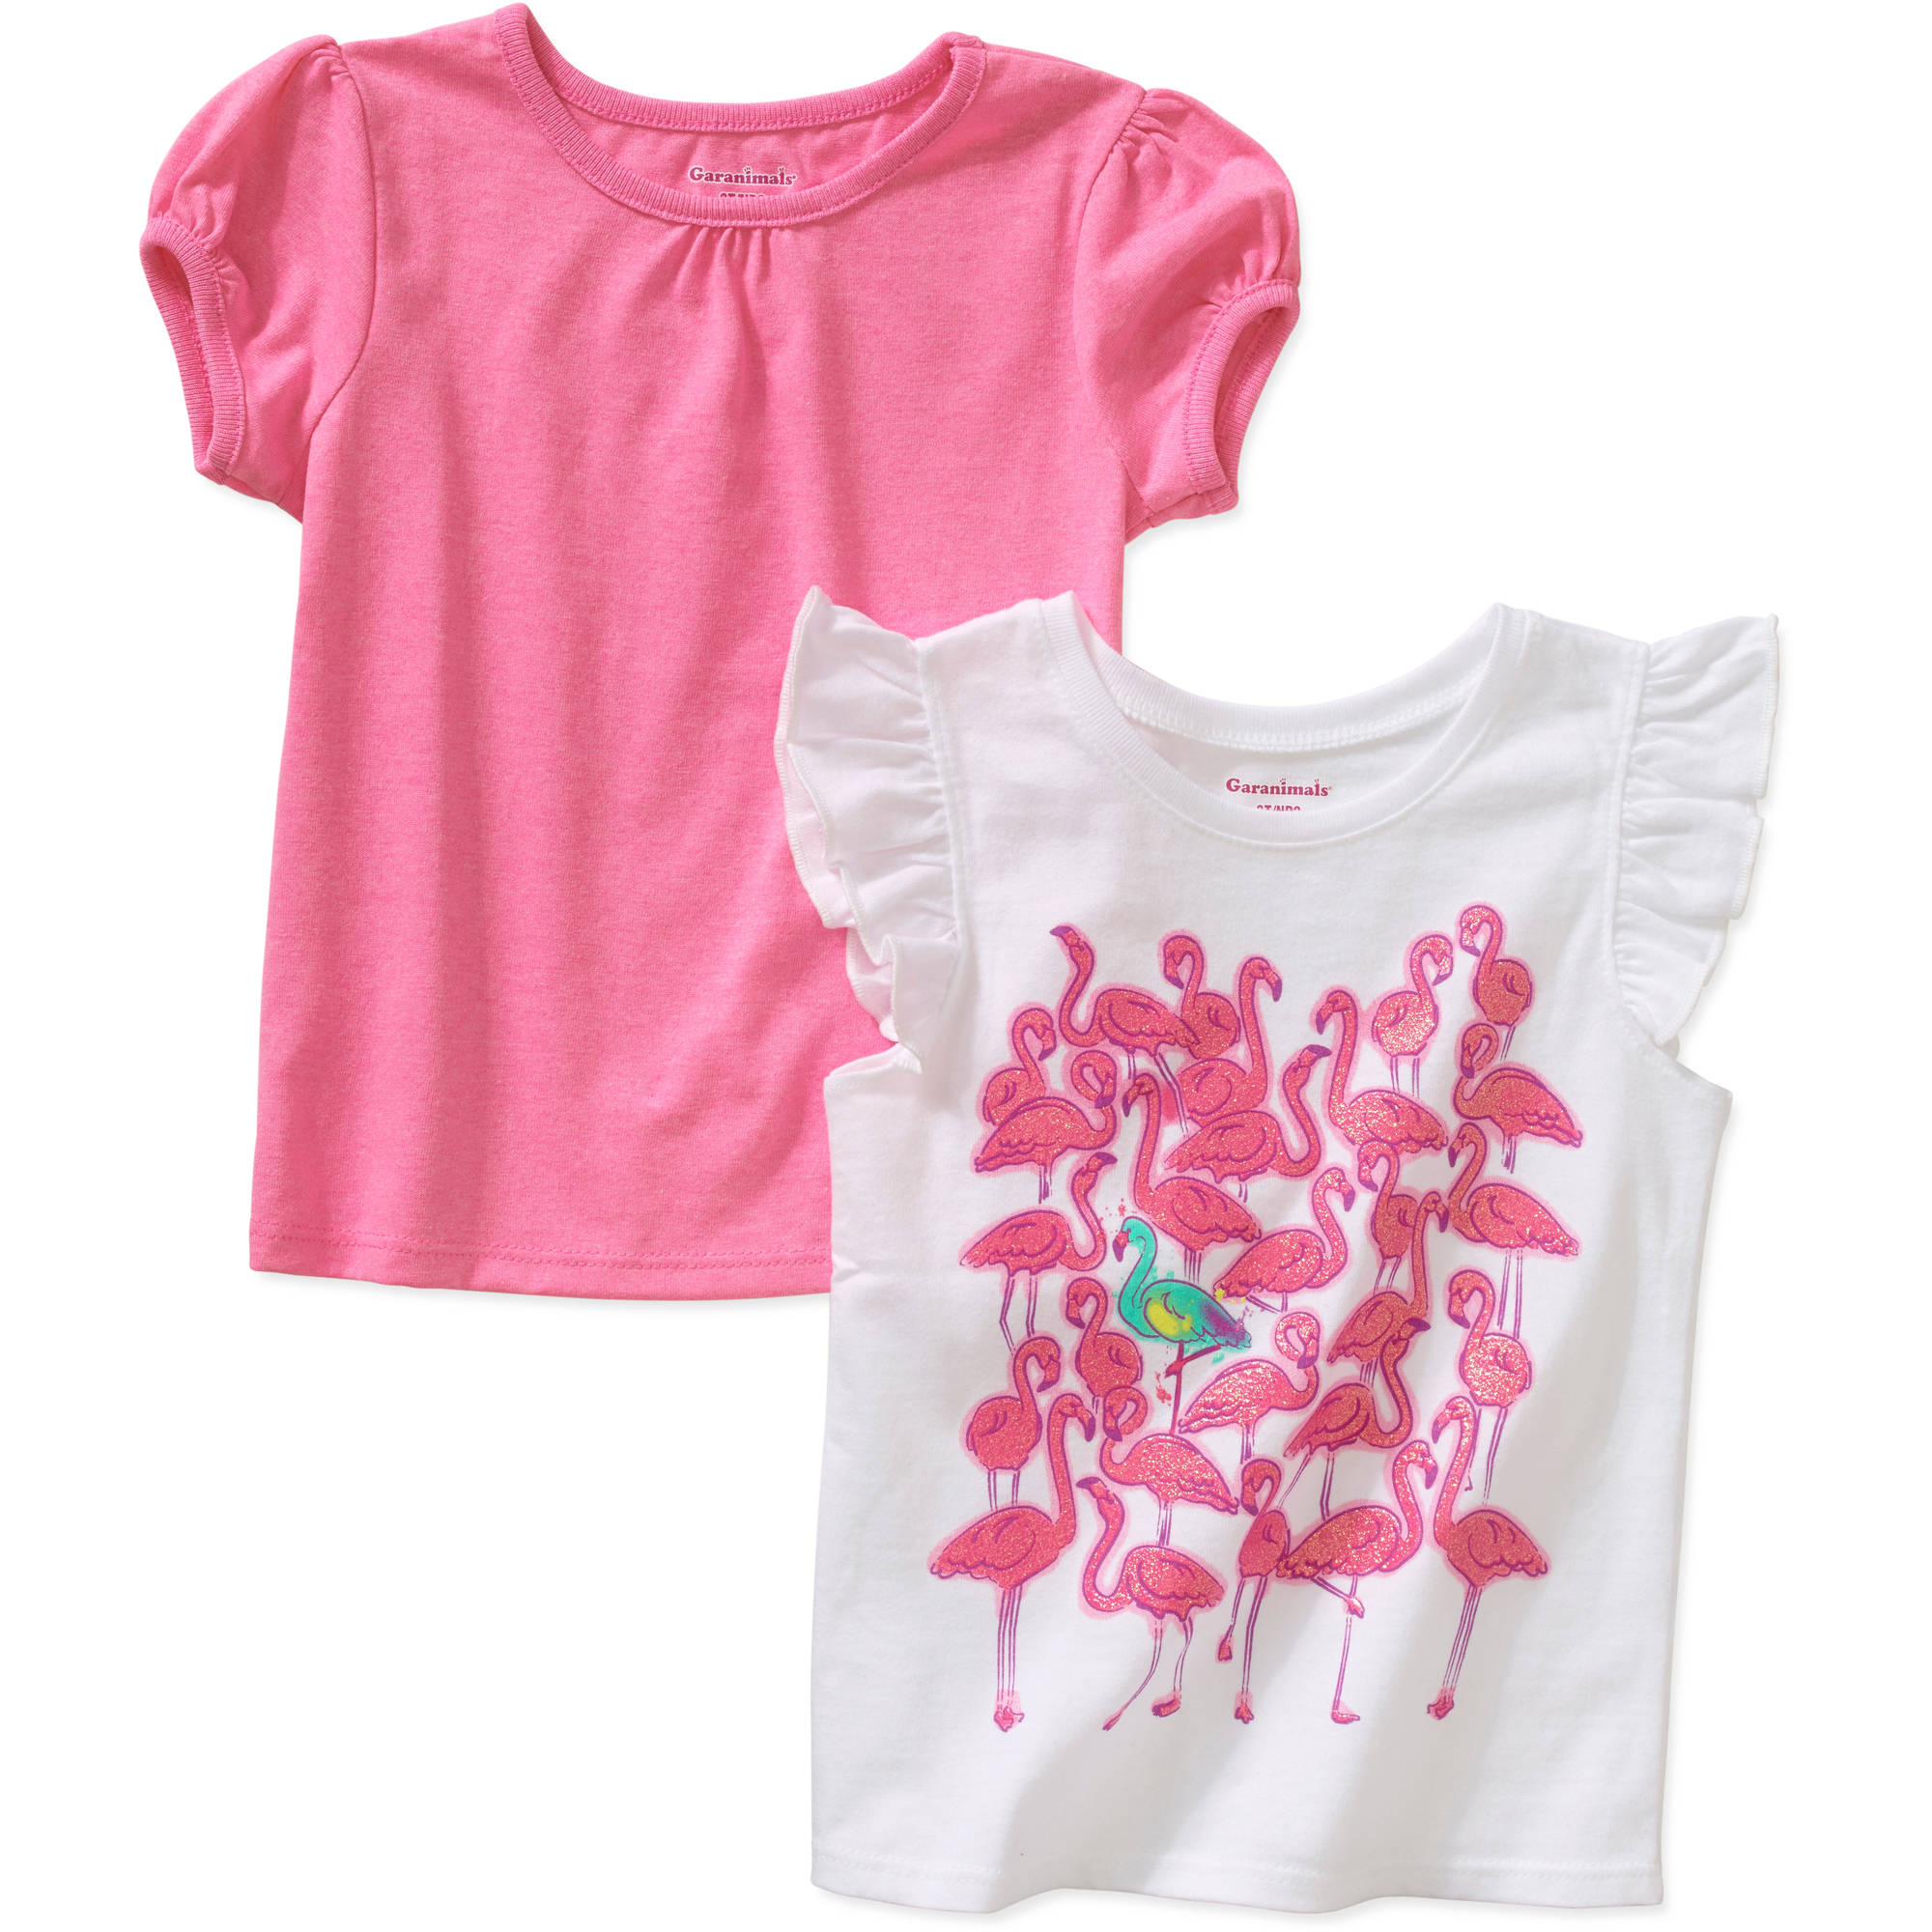 Baby Toddler Girl Tees, 2-Pack - image 1 of 1